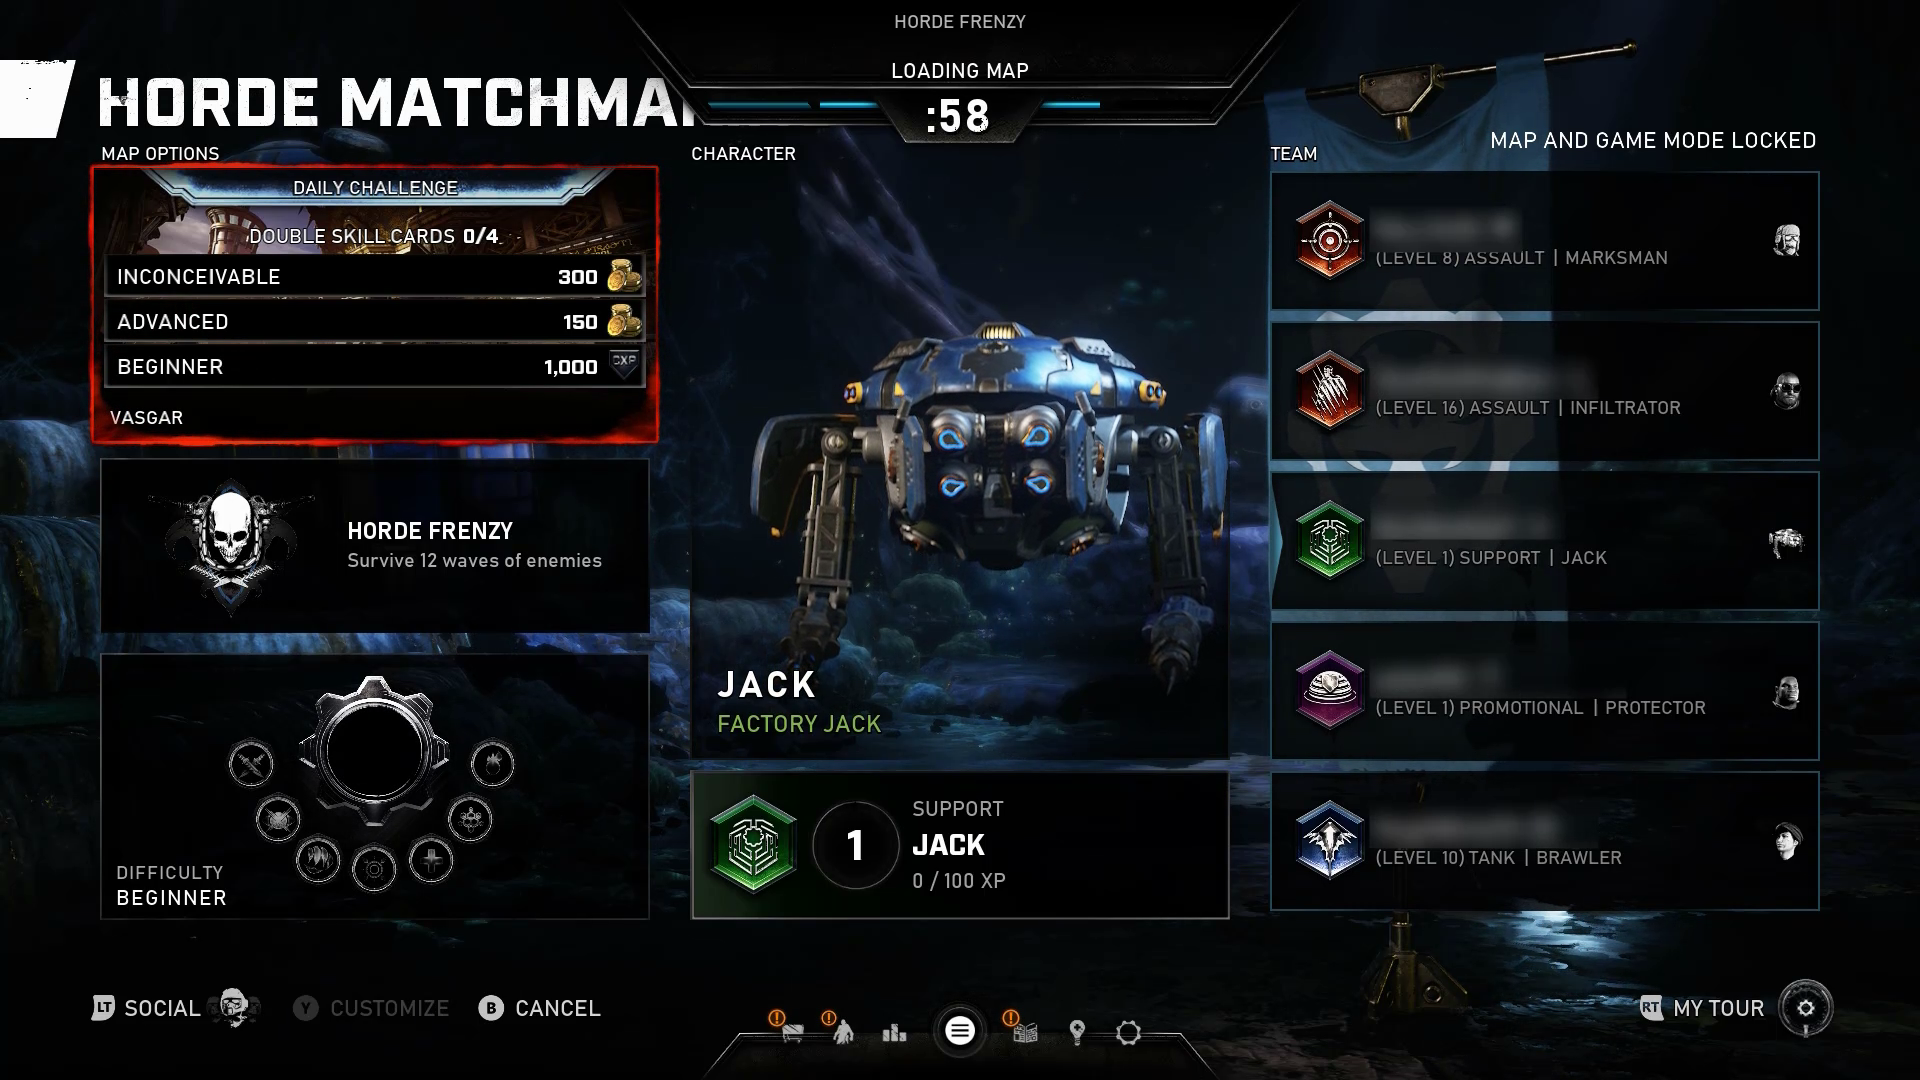 A screenshot from Gears 5. The "Horde Matchmaking" screen is shown. A countdown timer that's displaying 58 seconds is shown at the top of the screen.